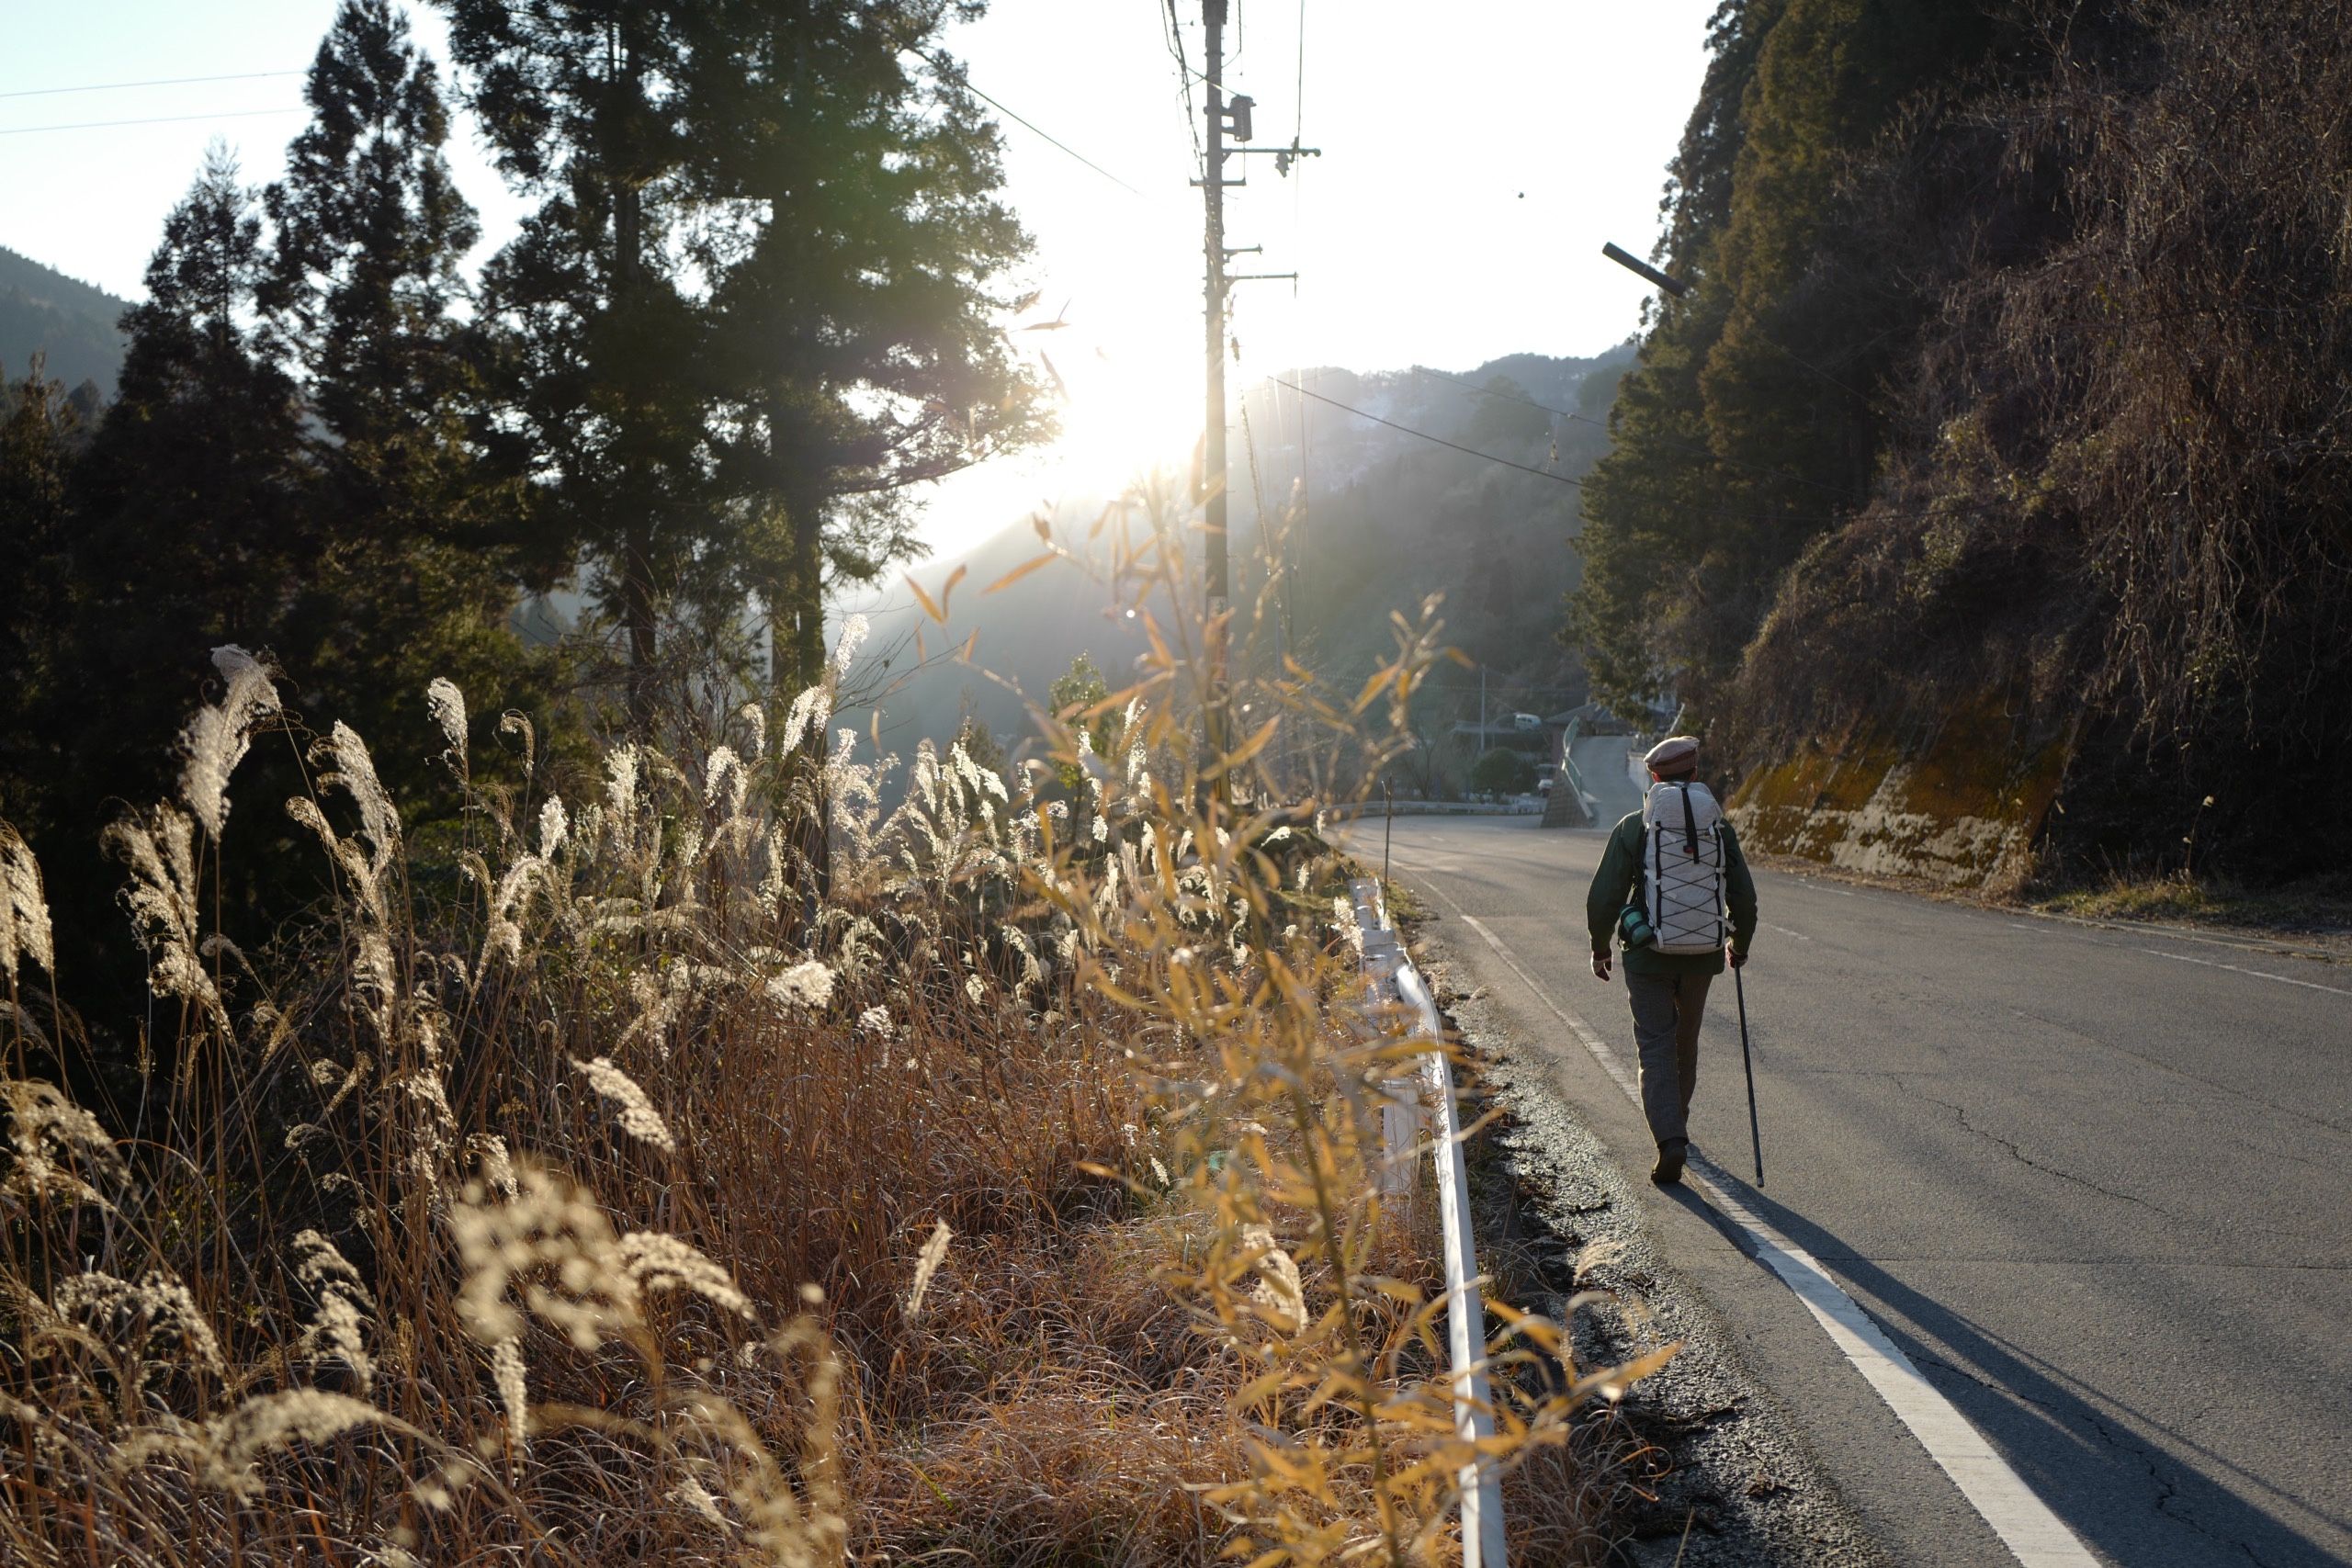 A man with a white rucksack, the author, walks down a country road.